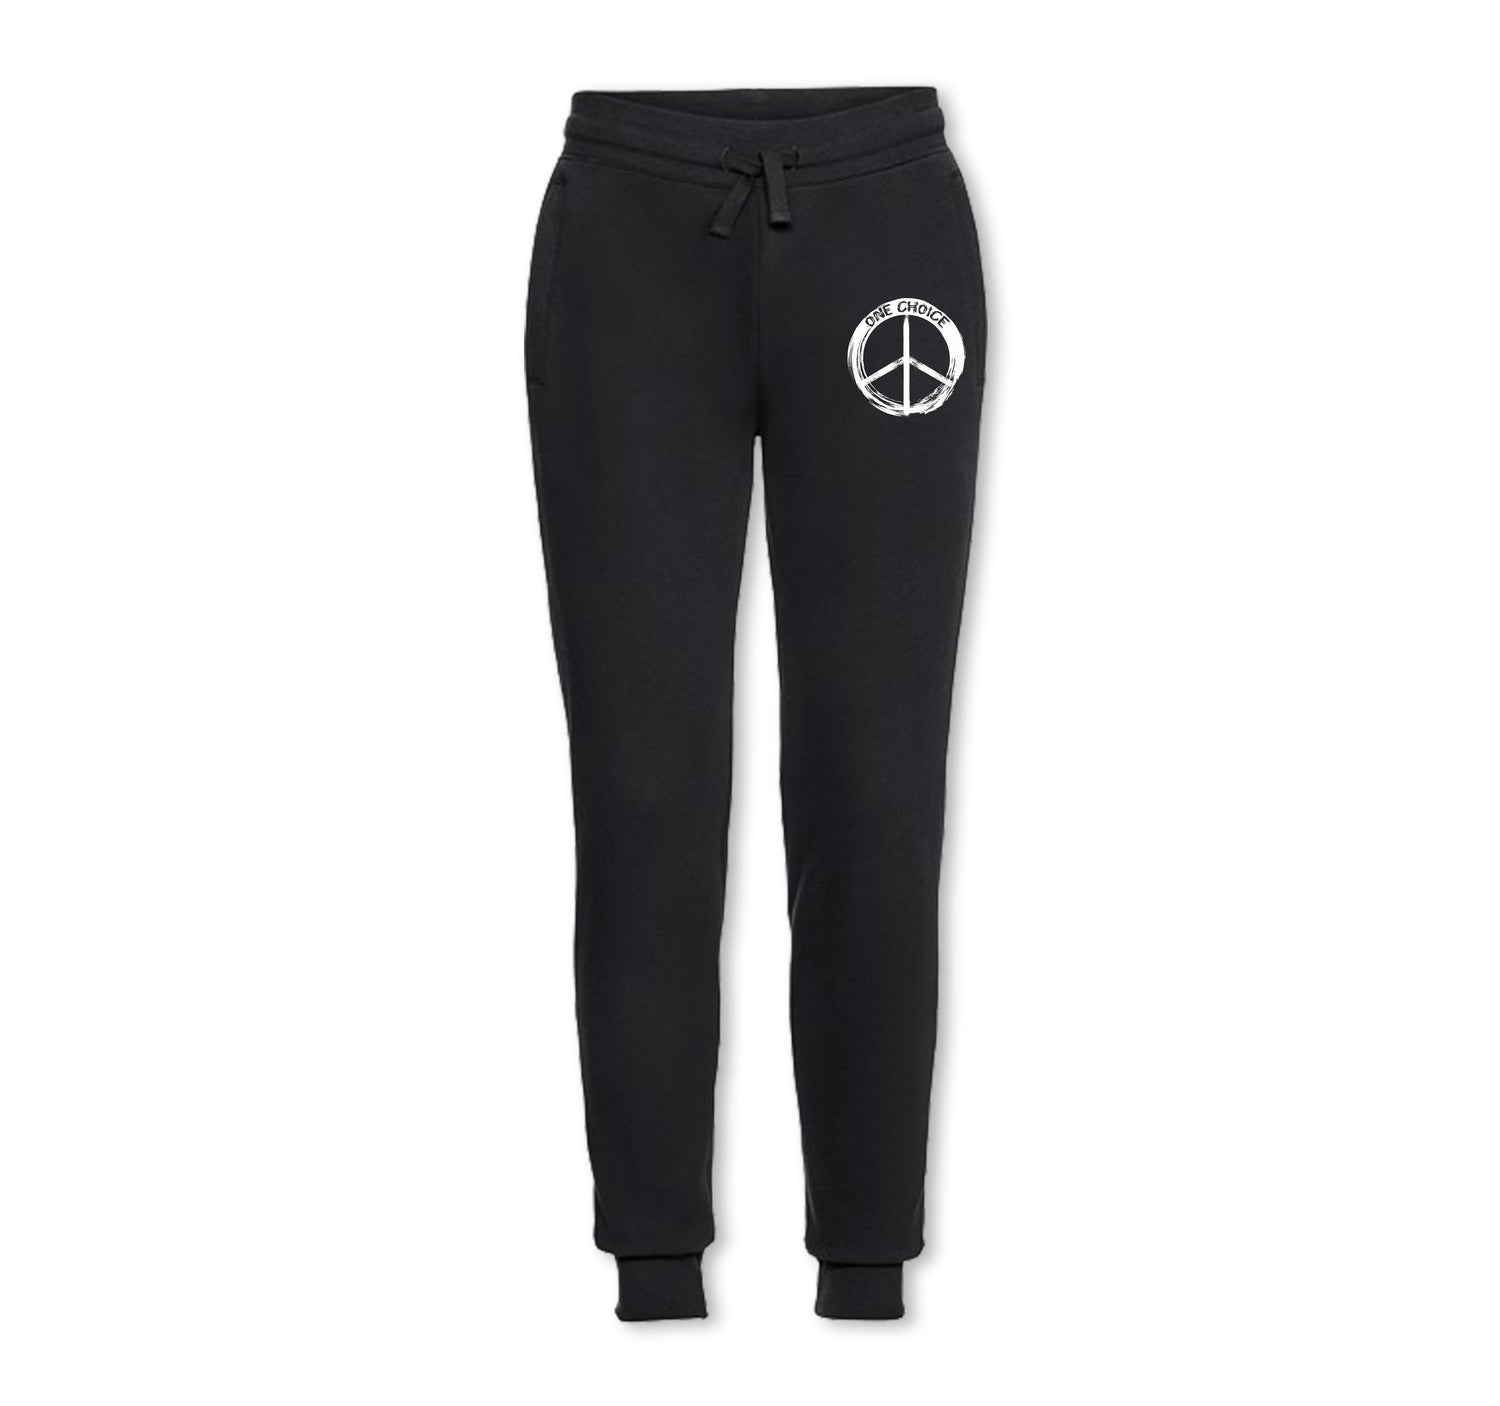 Round Peace Sign Joggers - Organic Cotton - One Choice Apparel